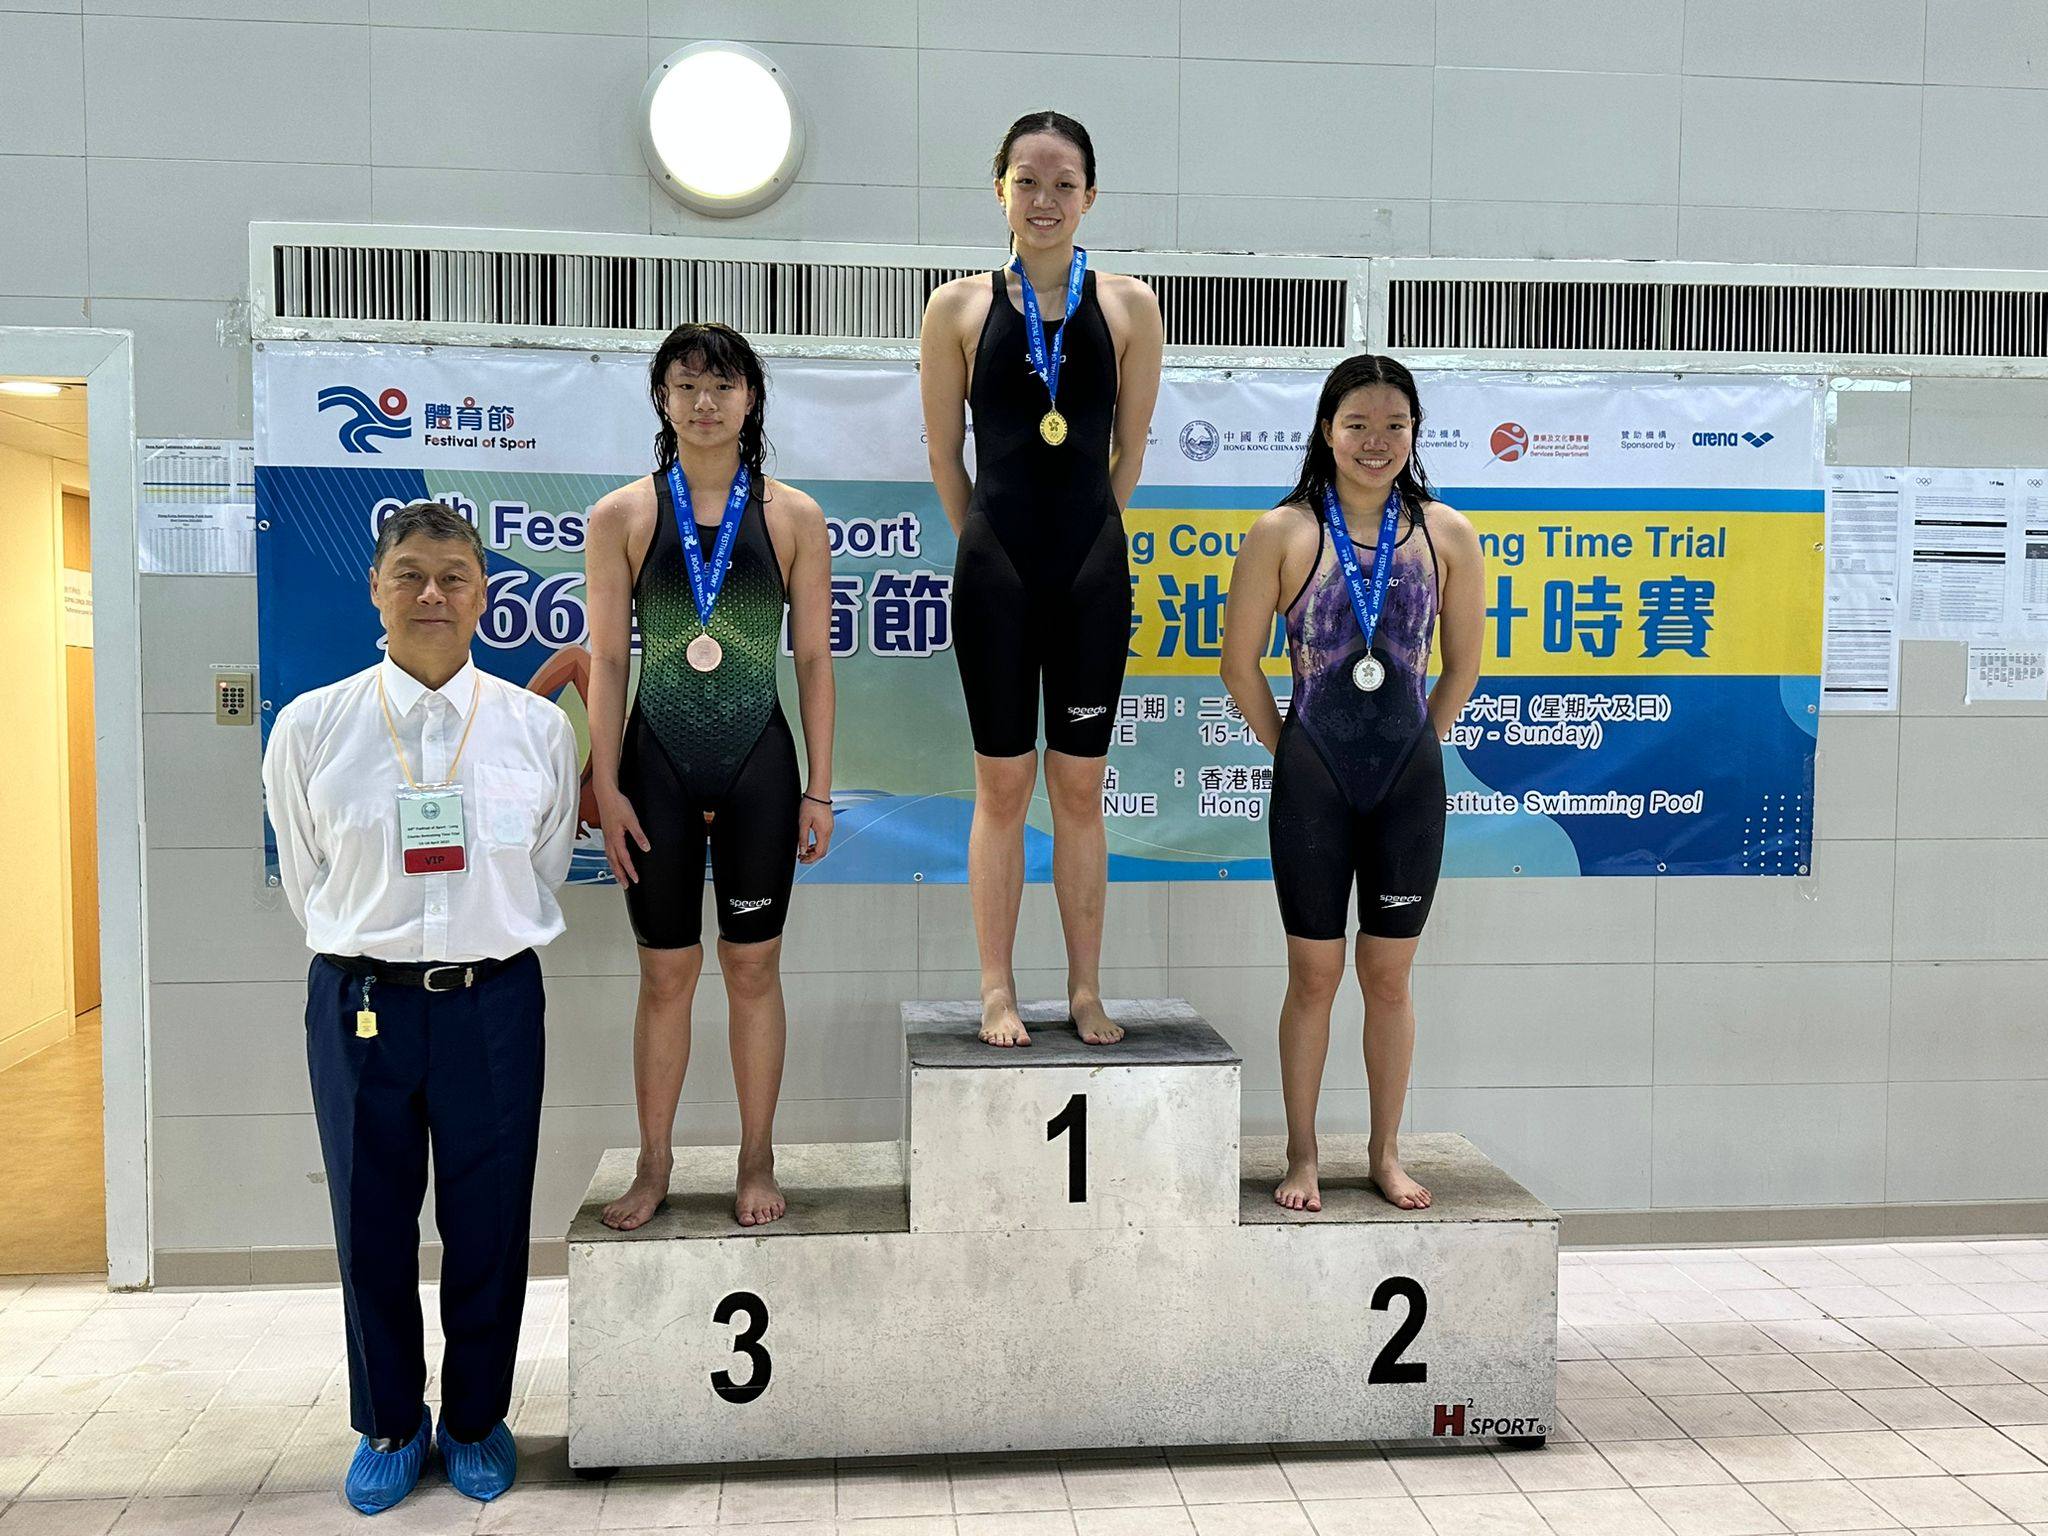 Cindy Cheung, 16, stands atop the podium after winning the 200m backstroke at the Long Course Time Trial. Photo: Swimming Association 